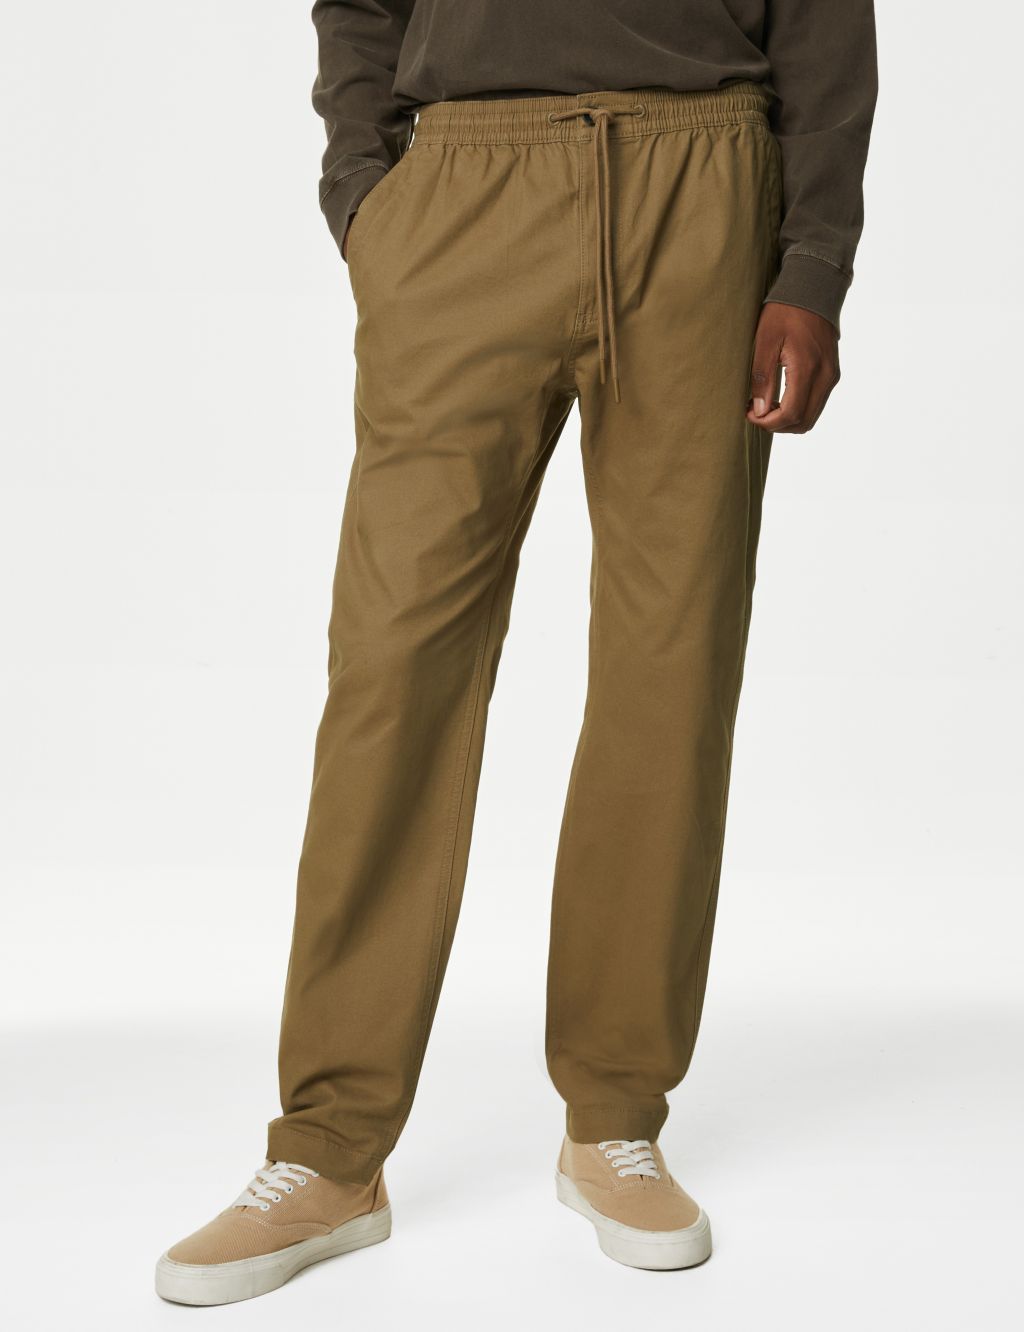 Tapered Fit Woven Stretch Trousers image 1